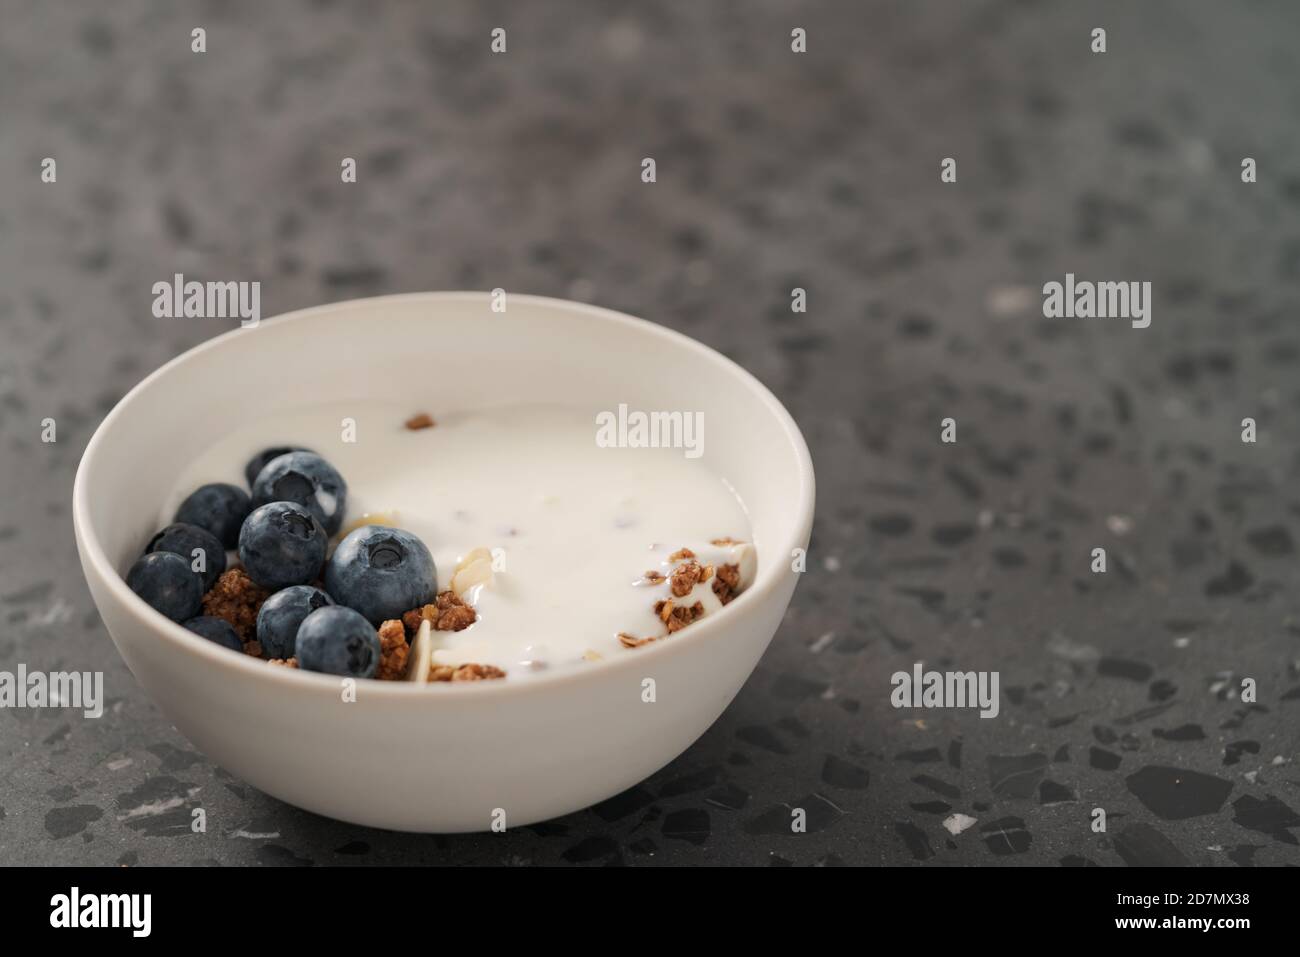 Healthy breakfast with whole grain granola and fresh blueberries in white bowl on concrete background, shallow focus Stock Photo